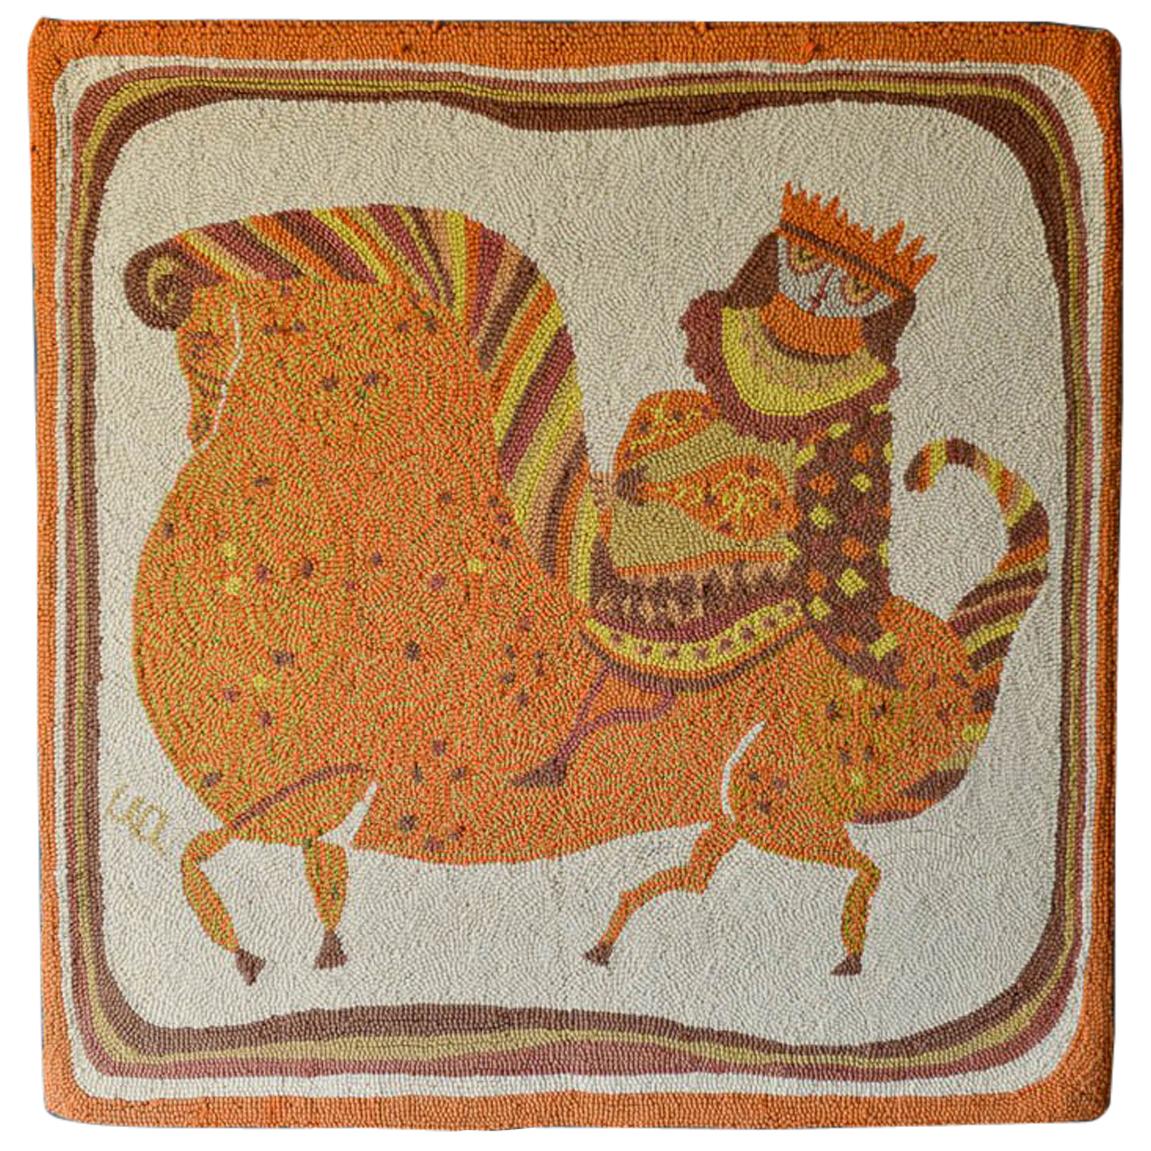 Evelyn Ackerman Hooked Wool Tapestry Titled 'Equestrian' circa 1959